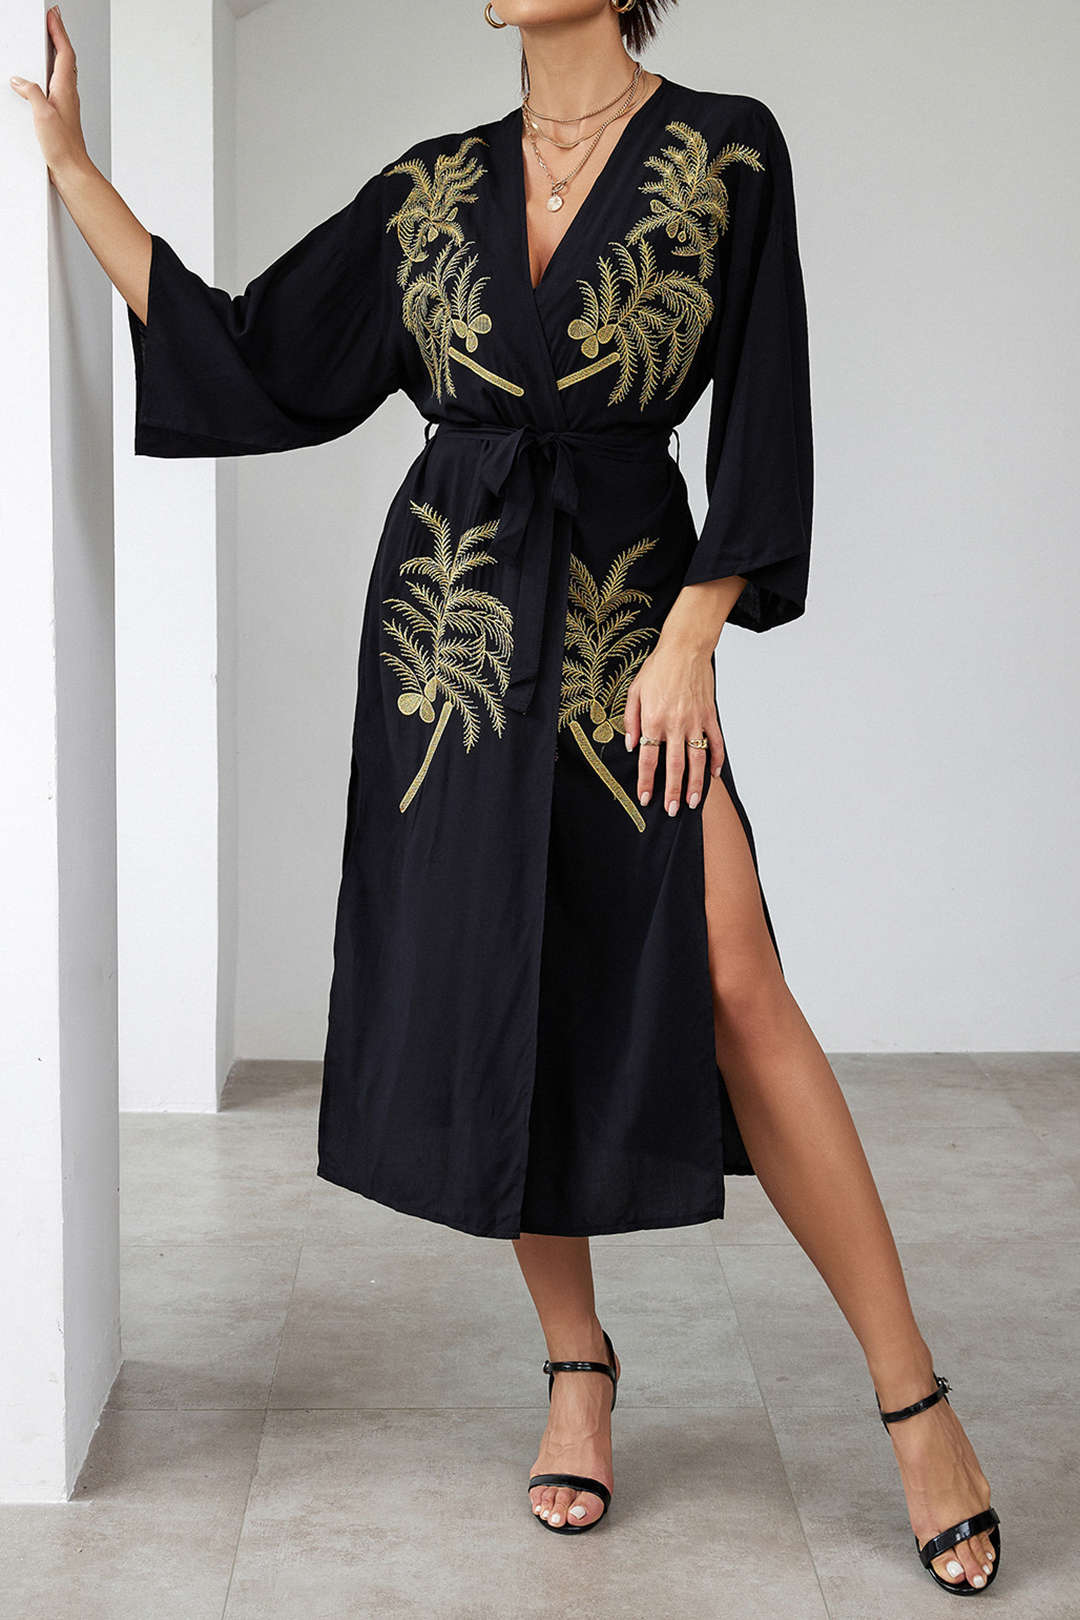 Coconut Tree Embroidery Belted Cover Up